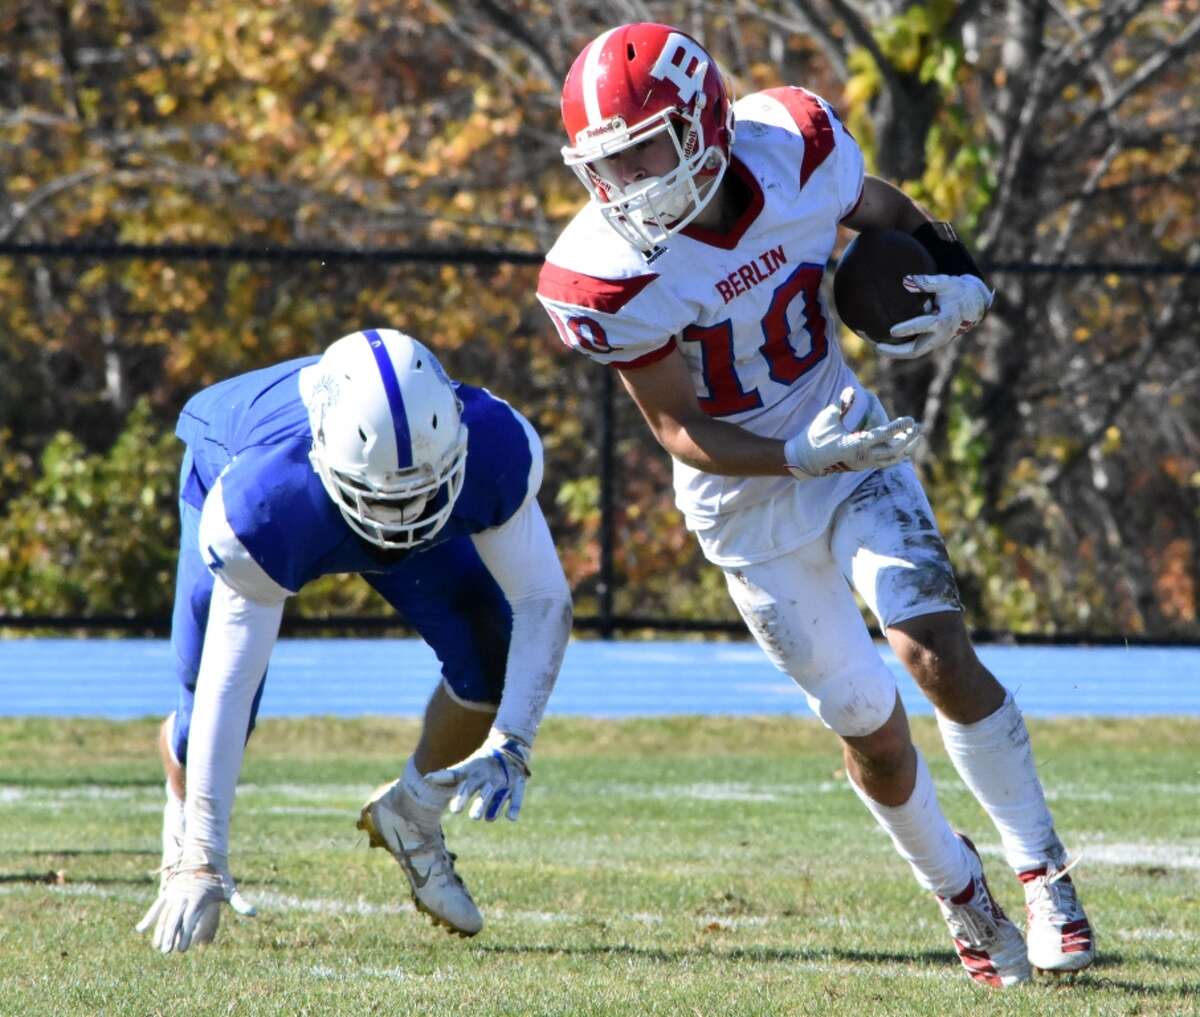 Berlin’s Joseph Caracoglia turns up field in the football game between Berlin and Lewis Mills at Lewis Mills high in Burlington on Oct. 19, 2019. (Pete Paguaga, Hearst Connecticut Media)